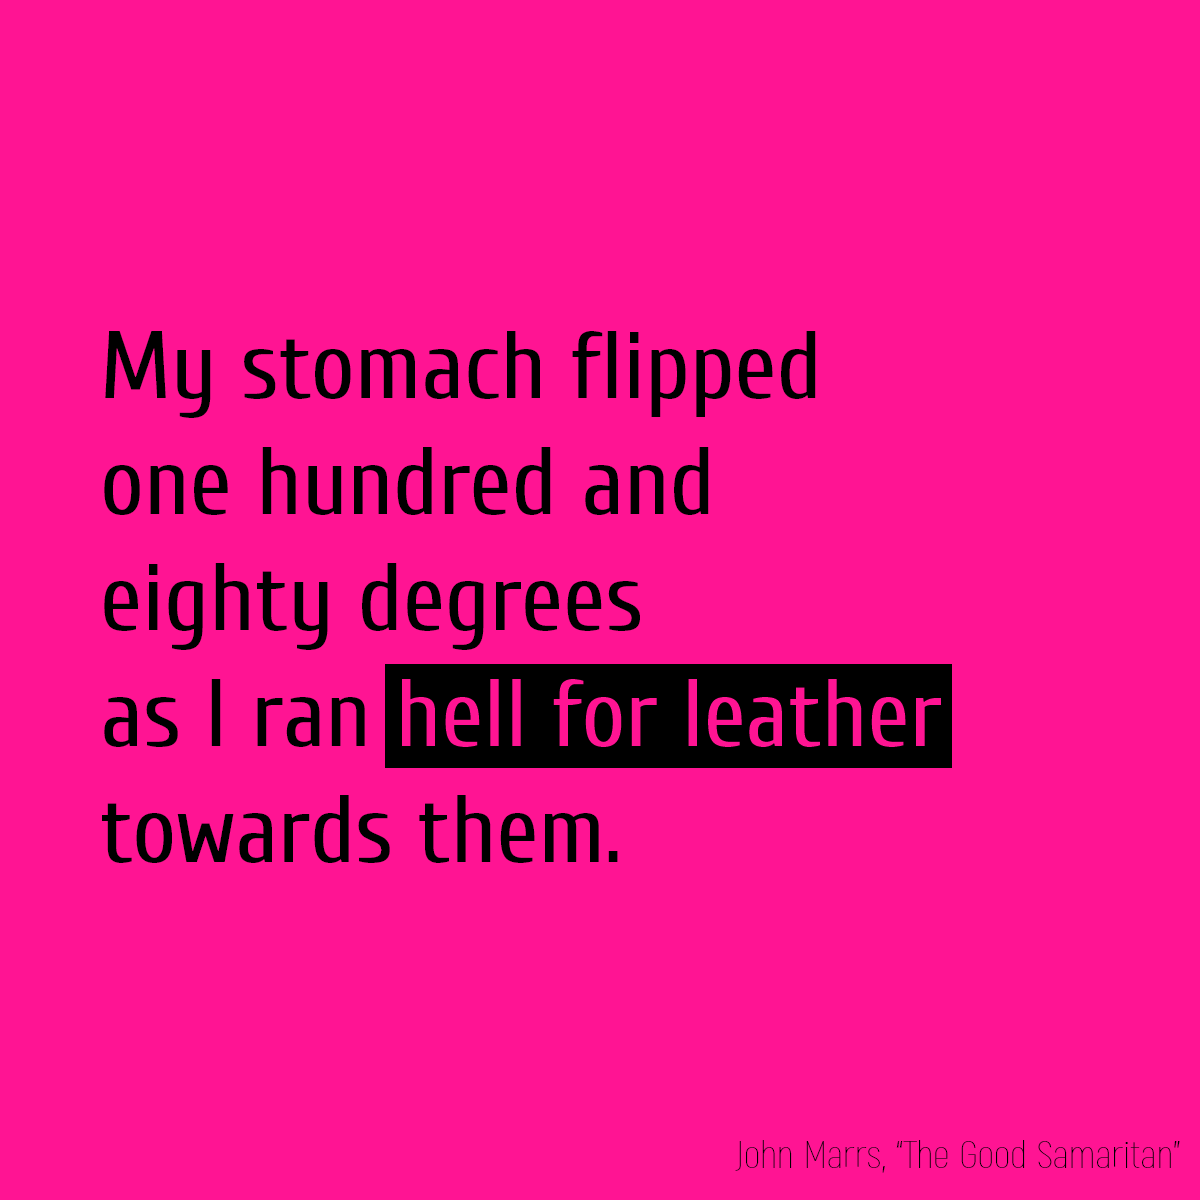 My stomach flipped one hundred and eighty degrees as I ran **hell for leather** towards them.